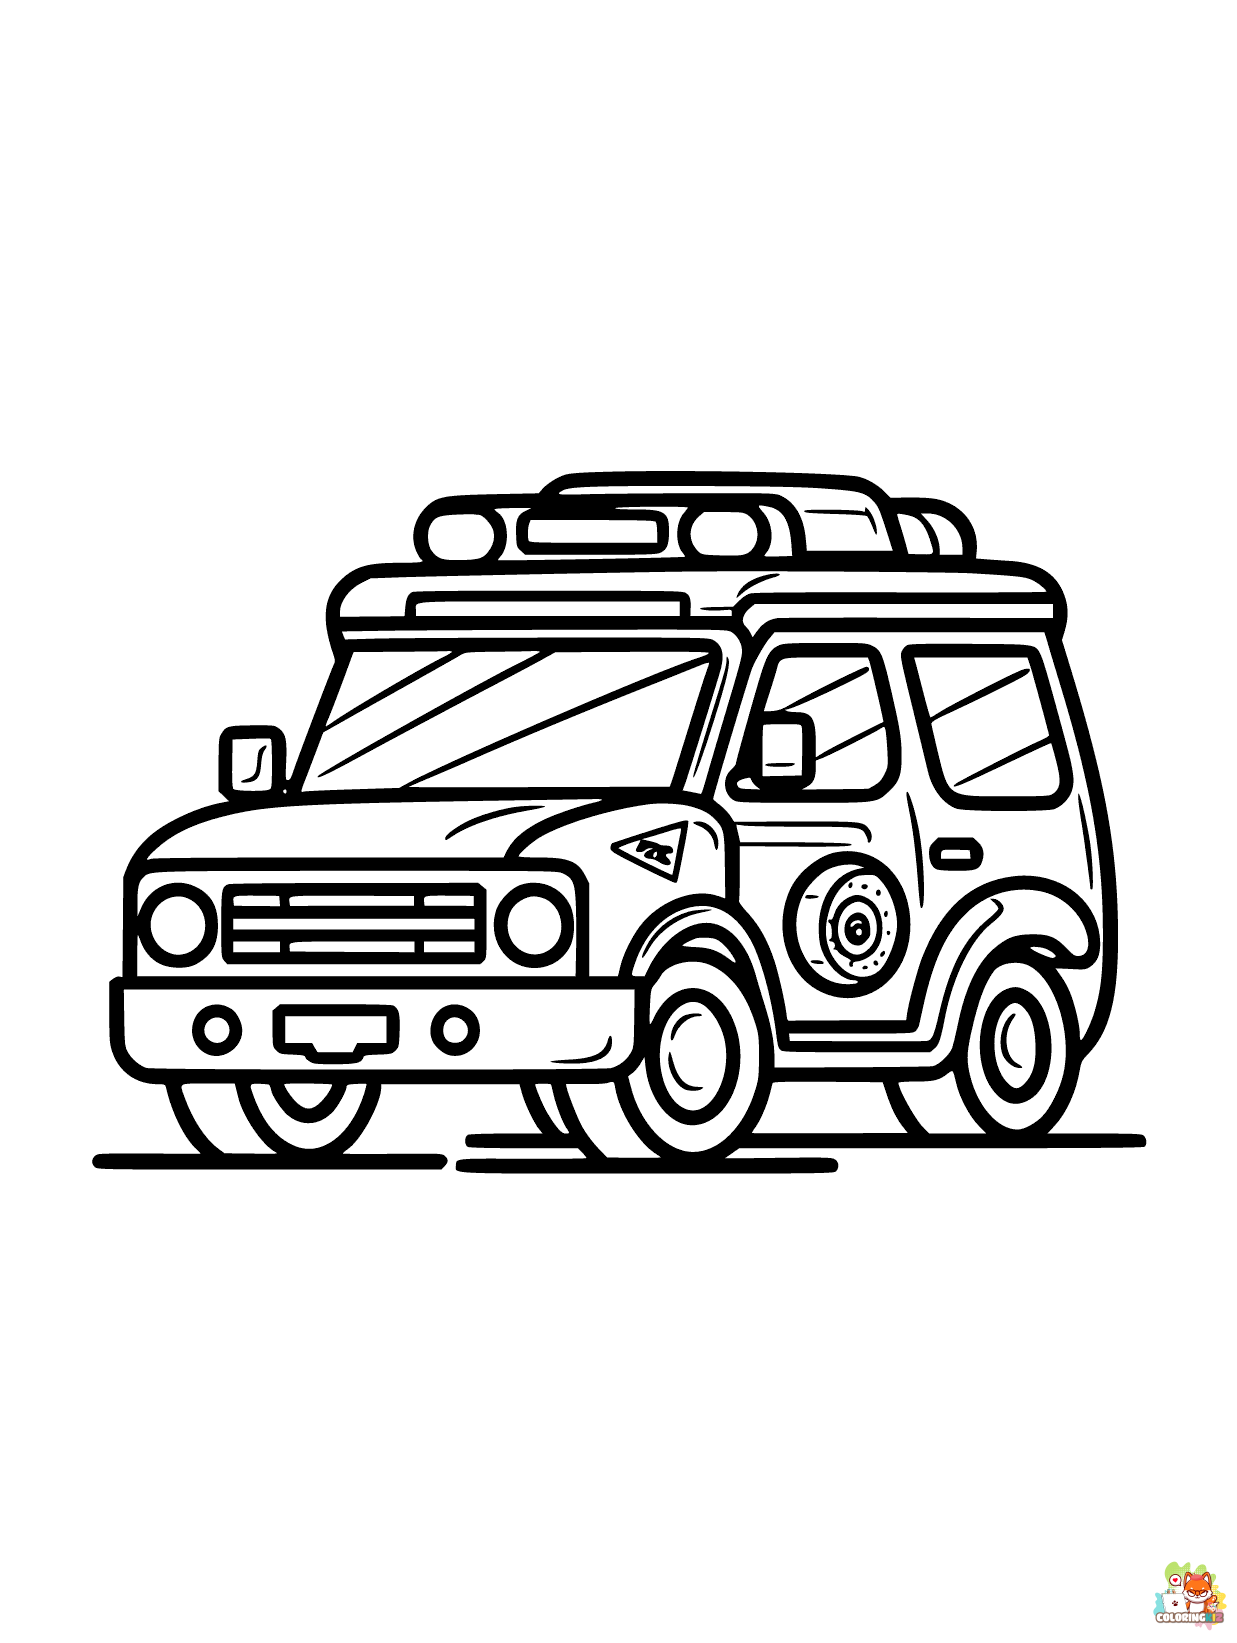 N1 Midjourney Car Coloring pages for kids A police car with fla 105c2eb7 592c 4744 9b31 aa384df7aa9d edge